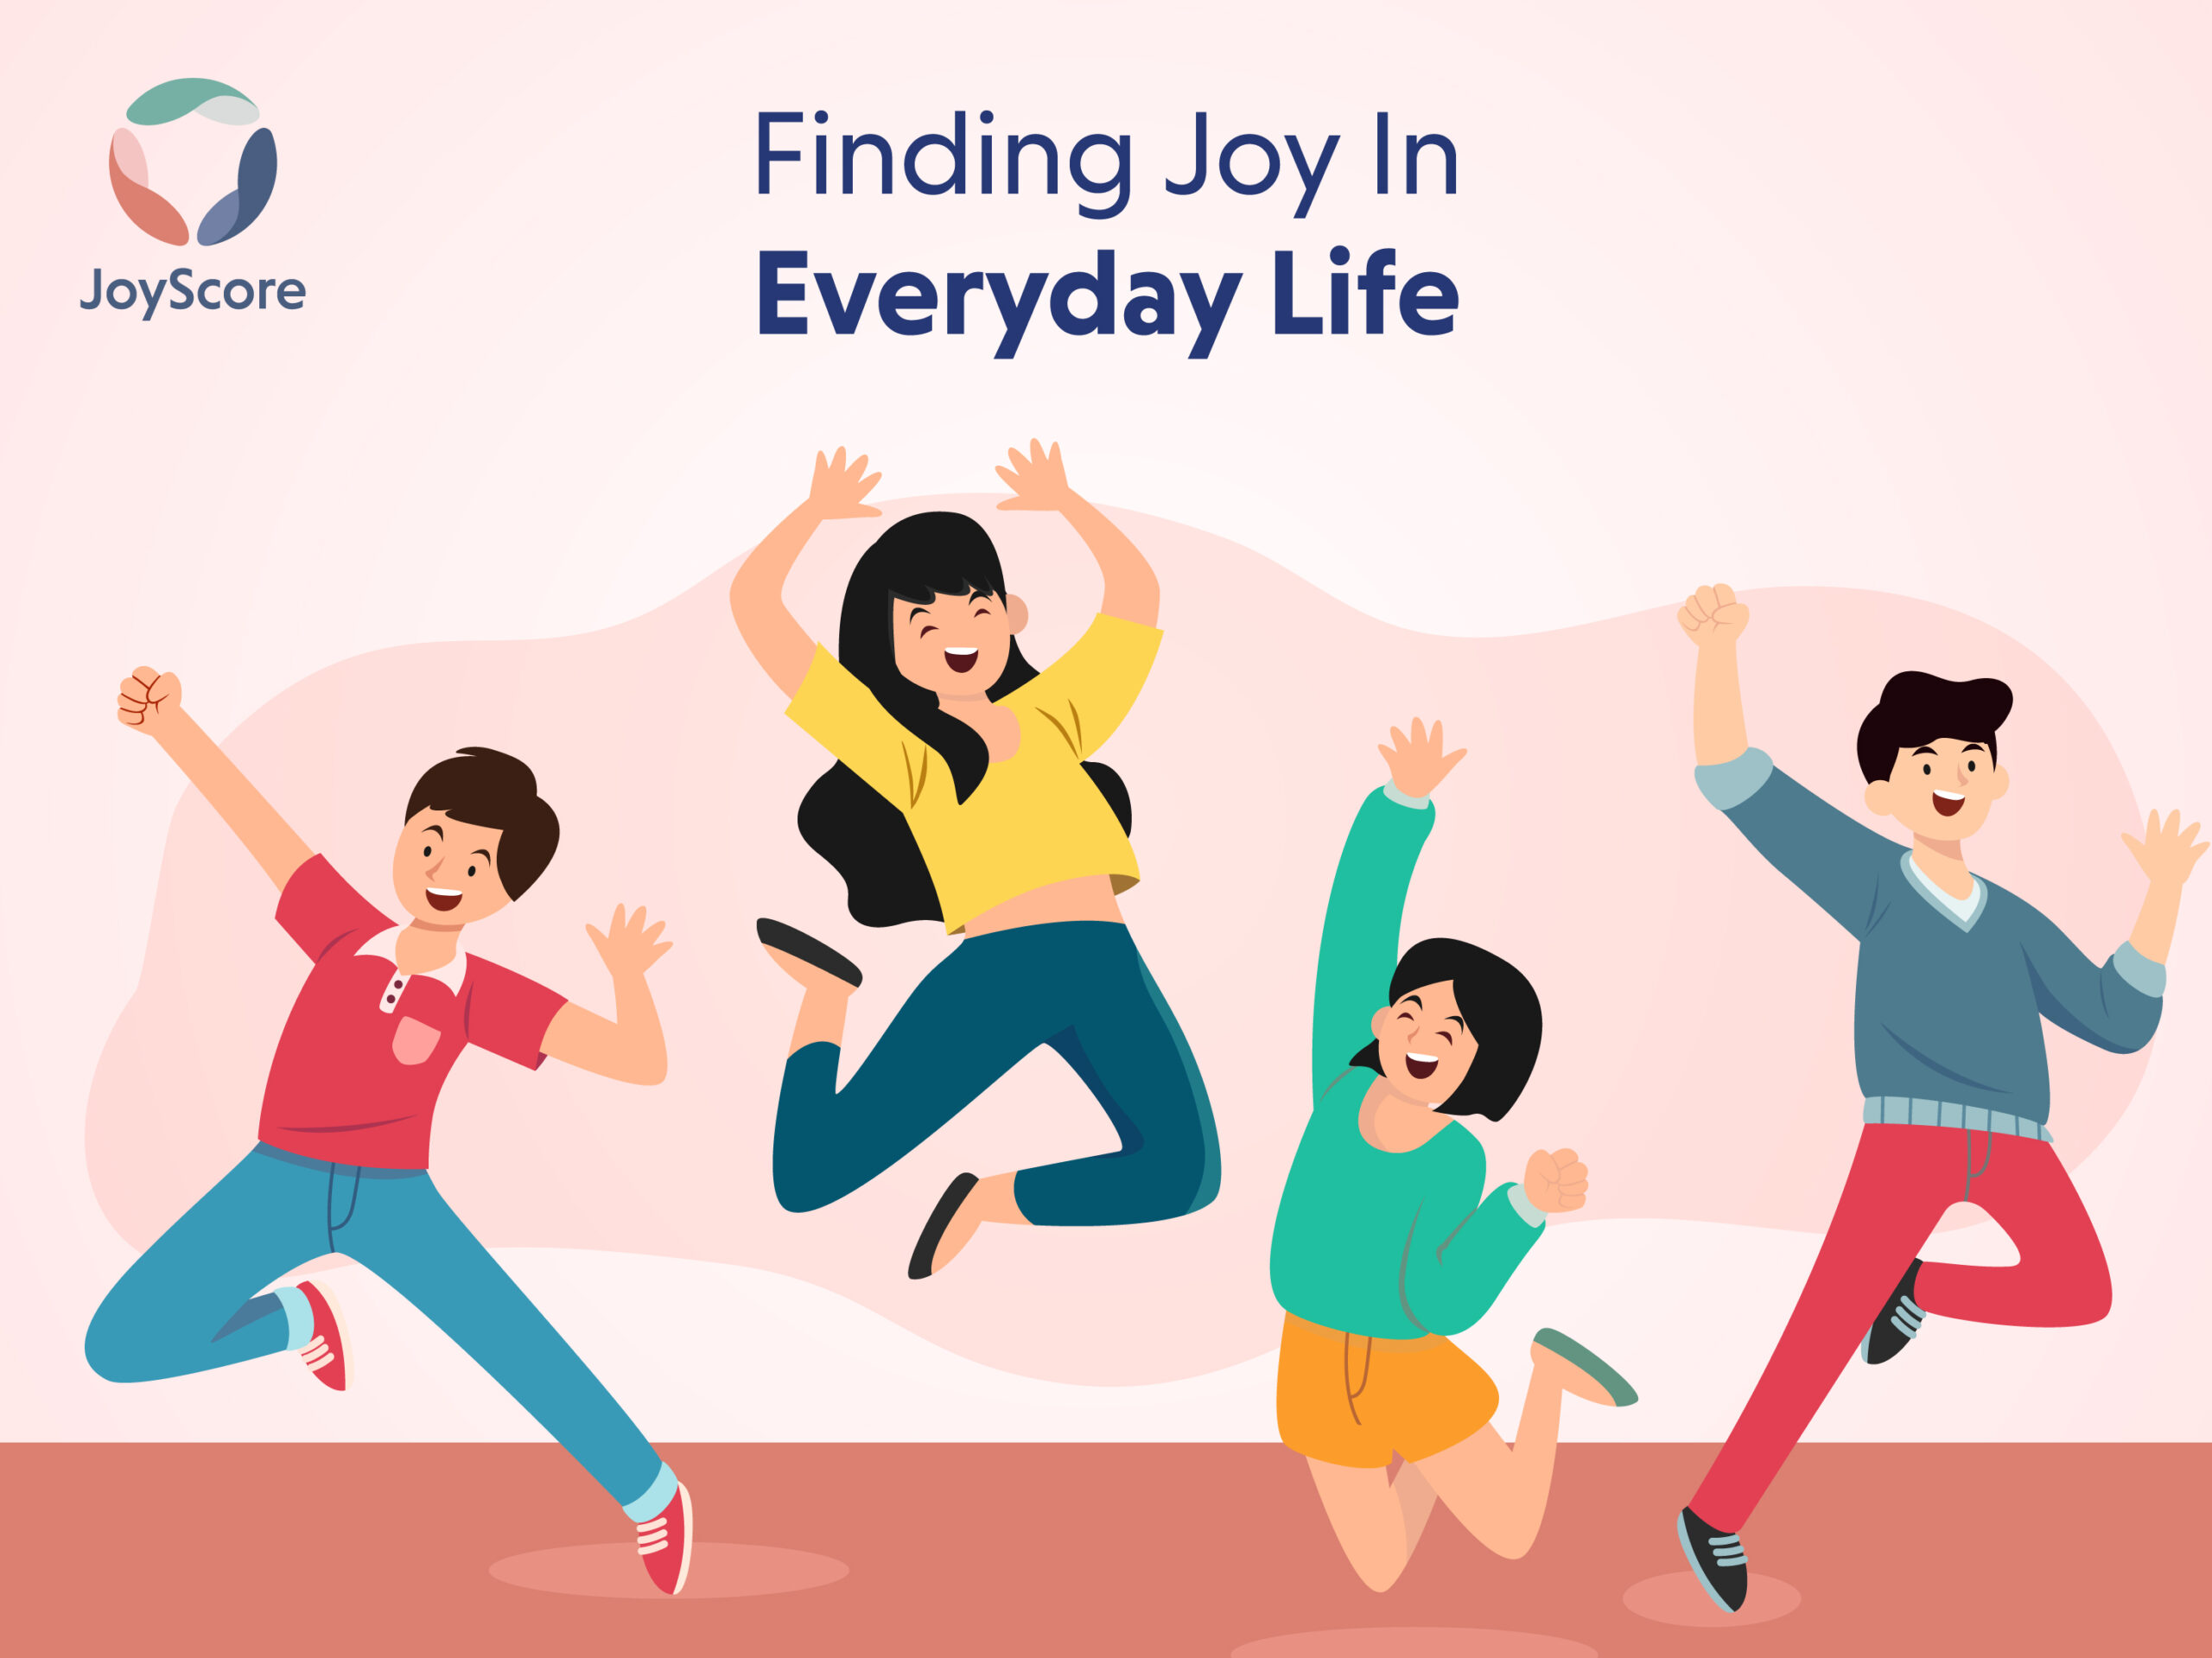 10 Thoughts On Finding Joy In Everyday Life